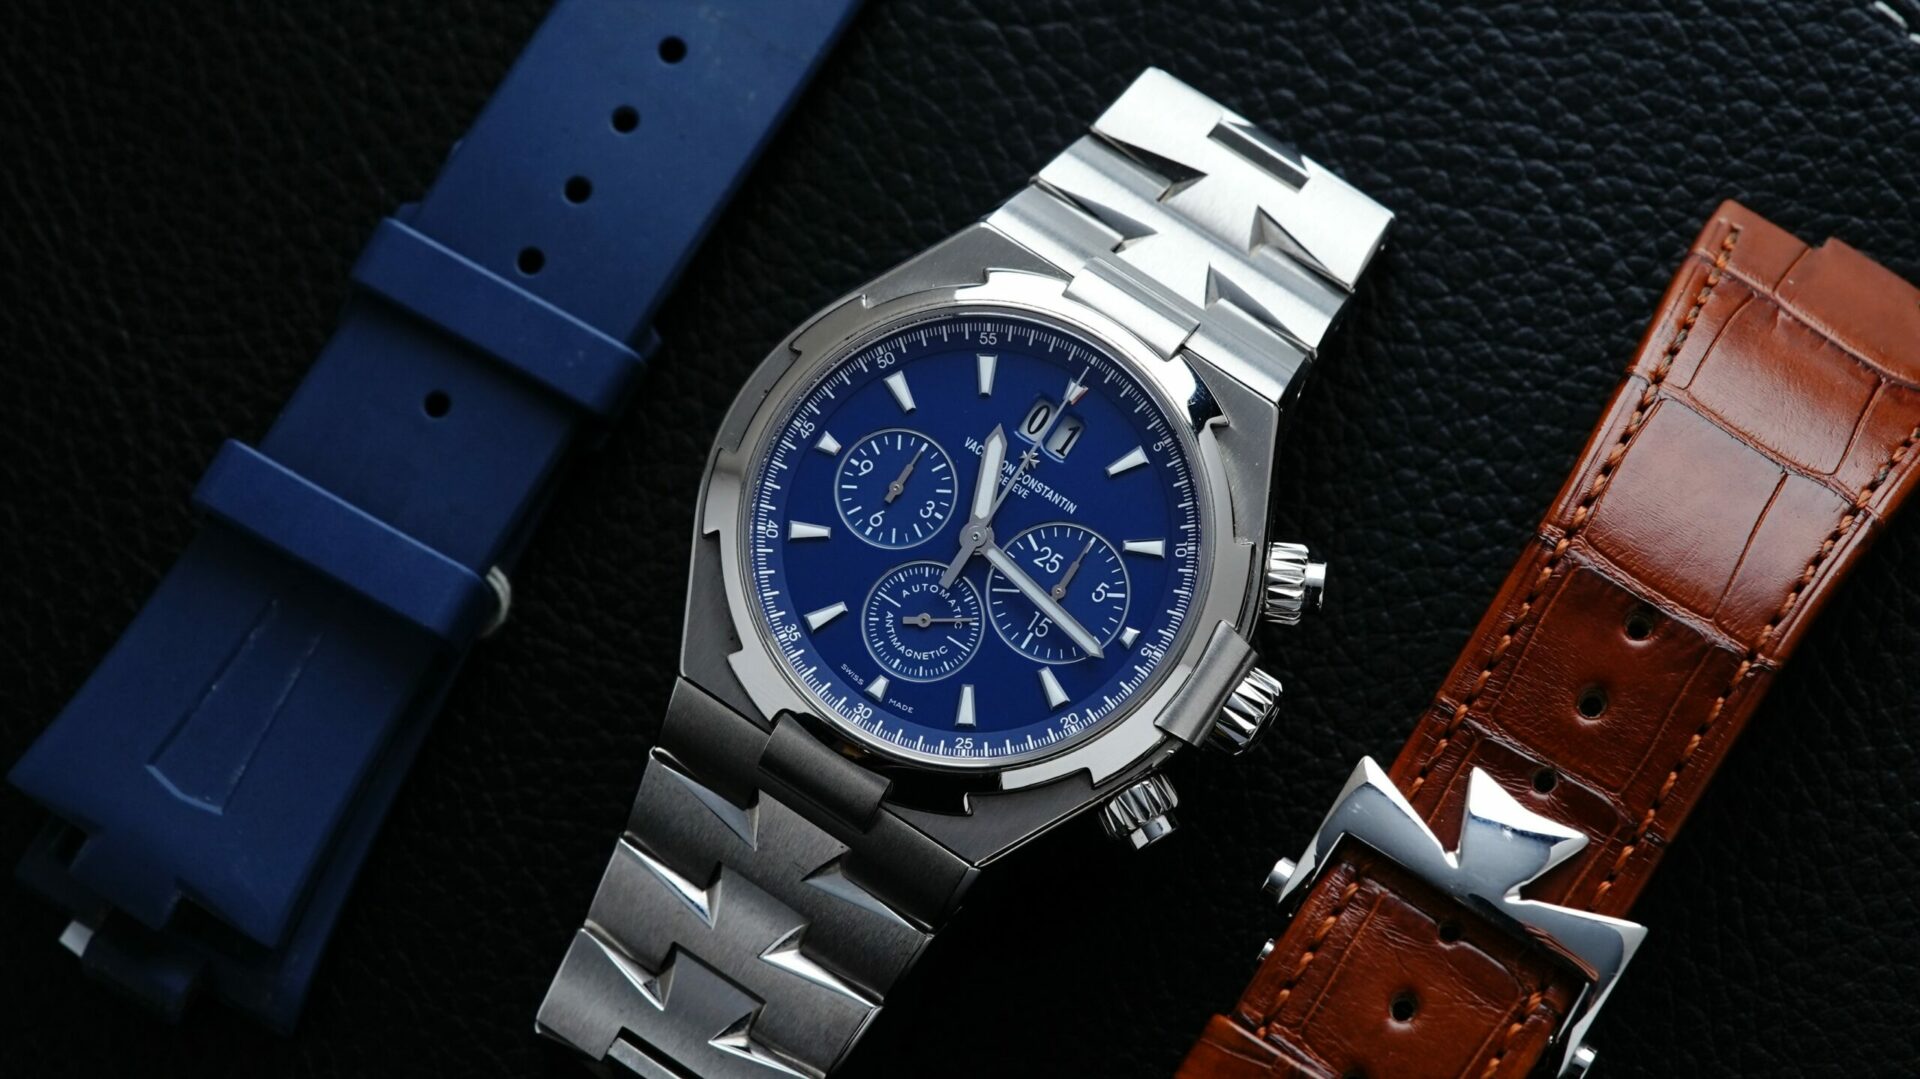 Vacheron Constantin Overseas Chronograph Very Rare 2nd Gen Blue Dial alongside rubber and leather straps.